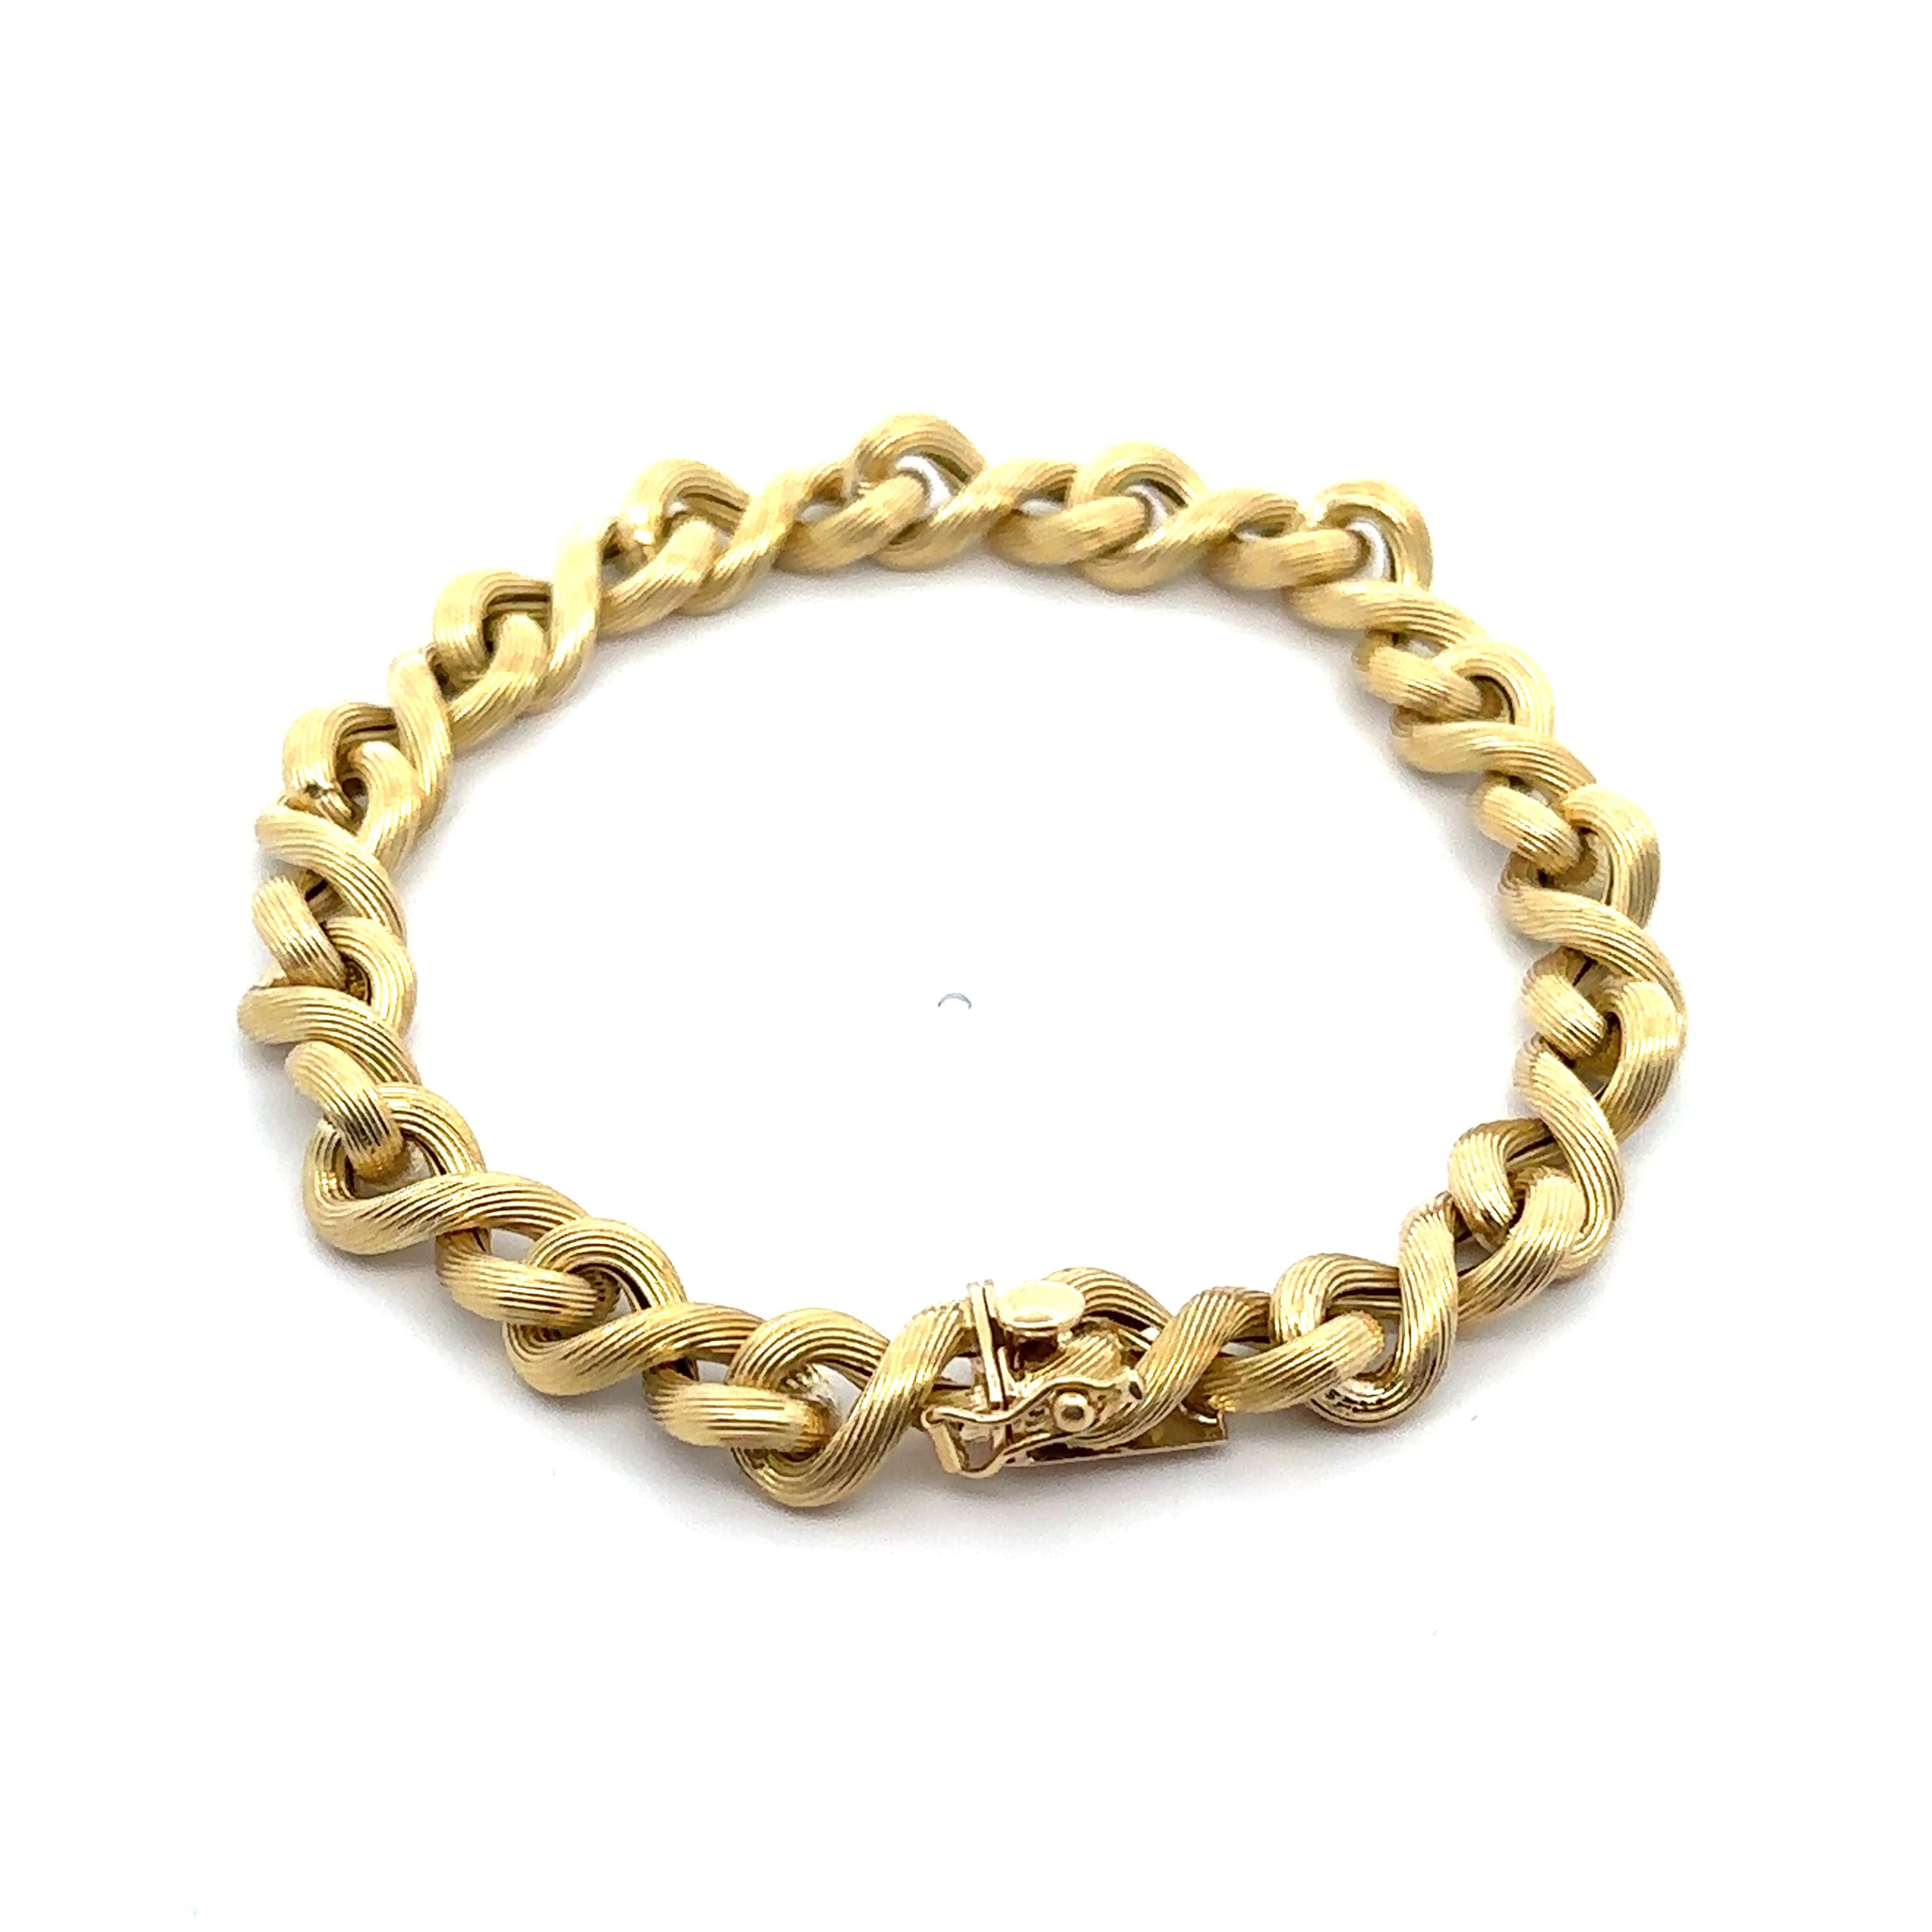 Vintage Italian 18k Yellow Gold Textured Puffed Figure 8 Link Chain Bracelet In Good Condition For Sale In Montclair, NJ